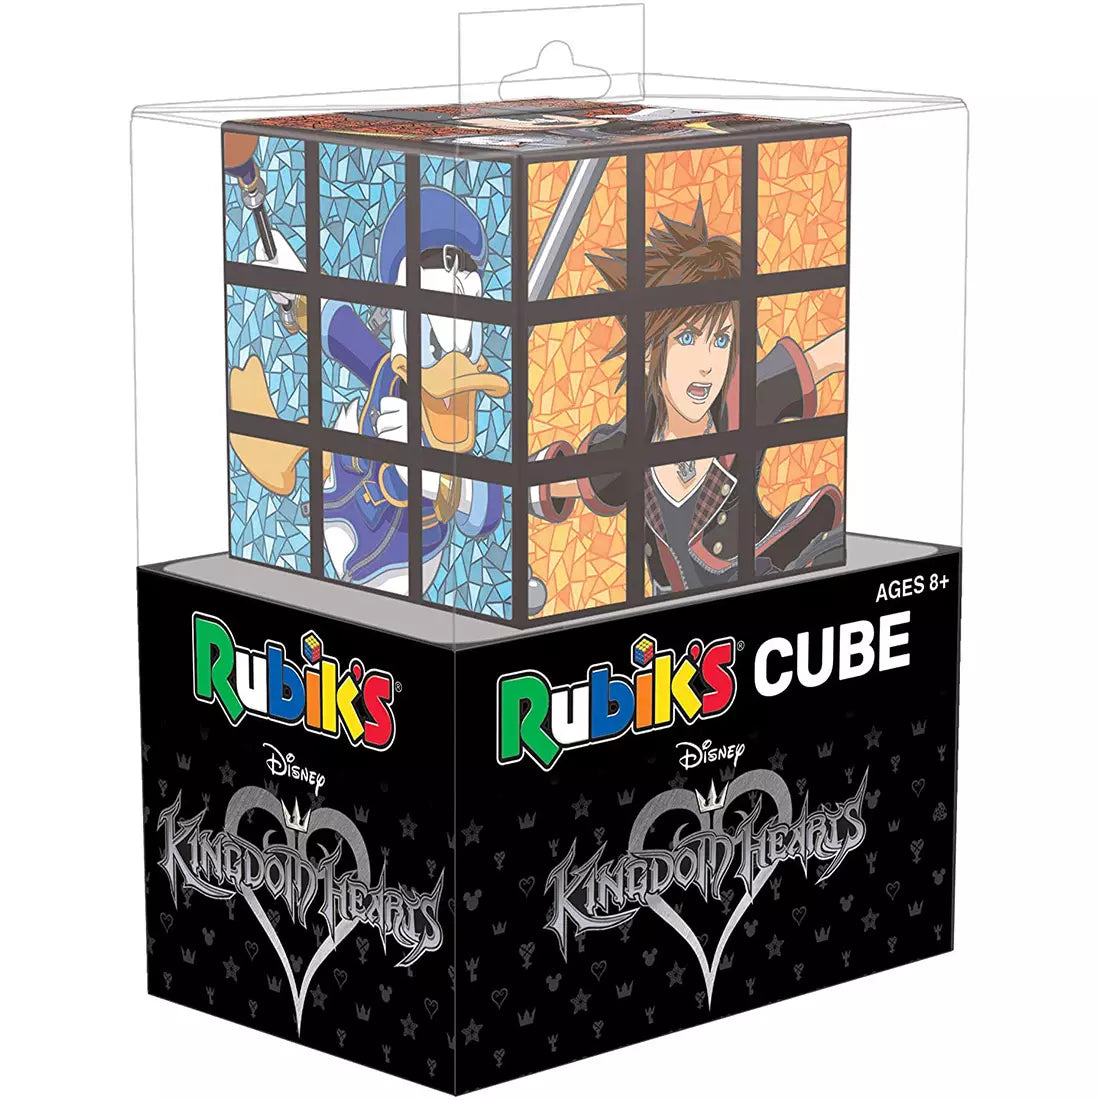 Rubiks Cube: Disney Official Kingdom Hearts Puzzle Game w/ Display Stand